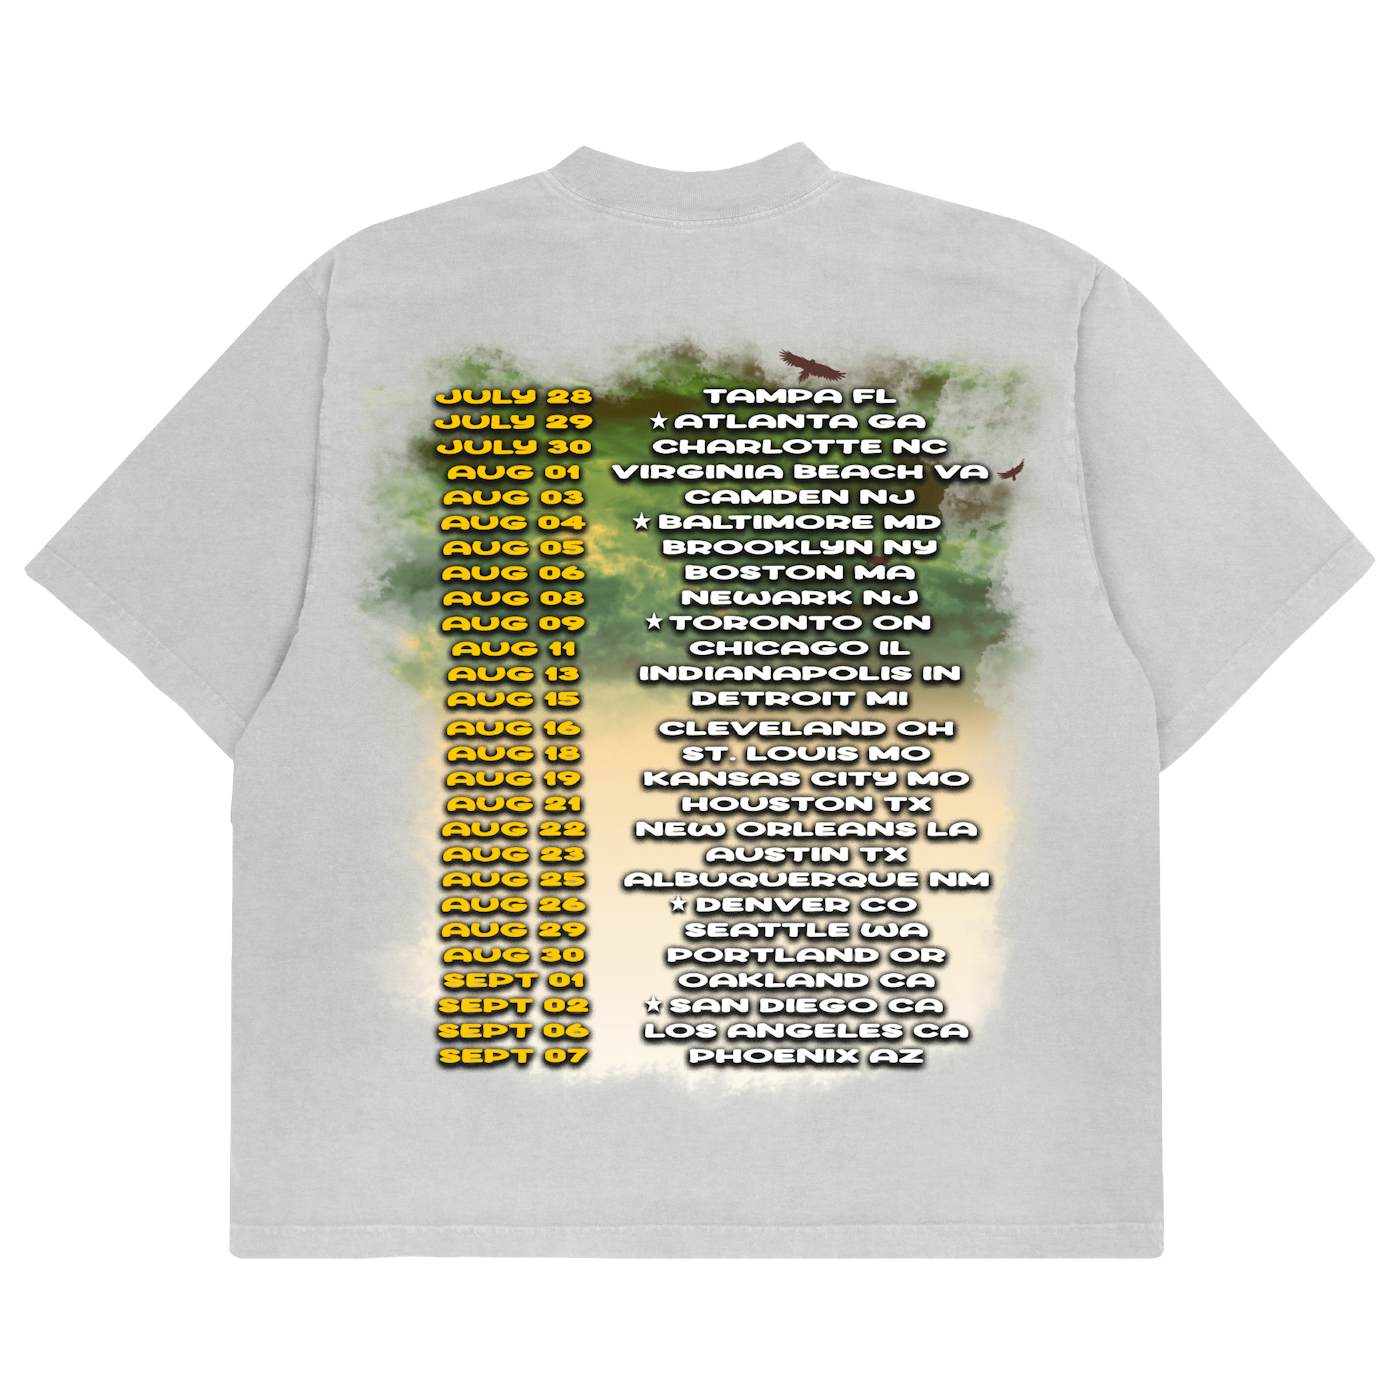 Lil Durk SORRY FOR THE DROUGHT TOUR T-SHIRT WHITE